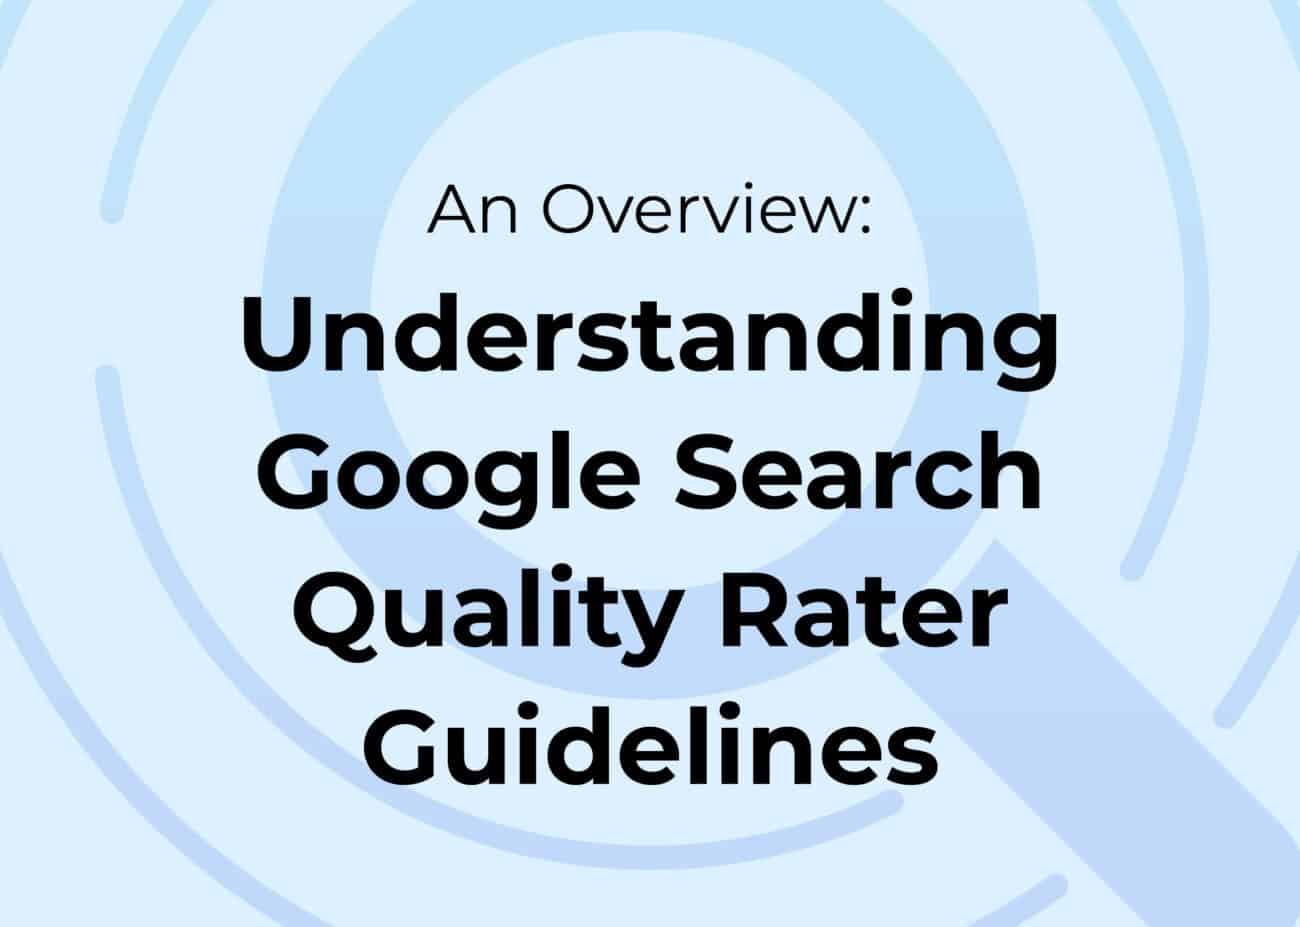 Google Search Quality Rater Guidelines An Overview